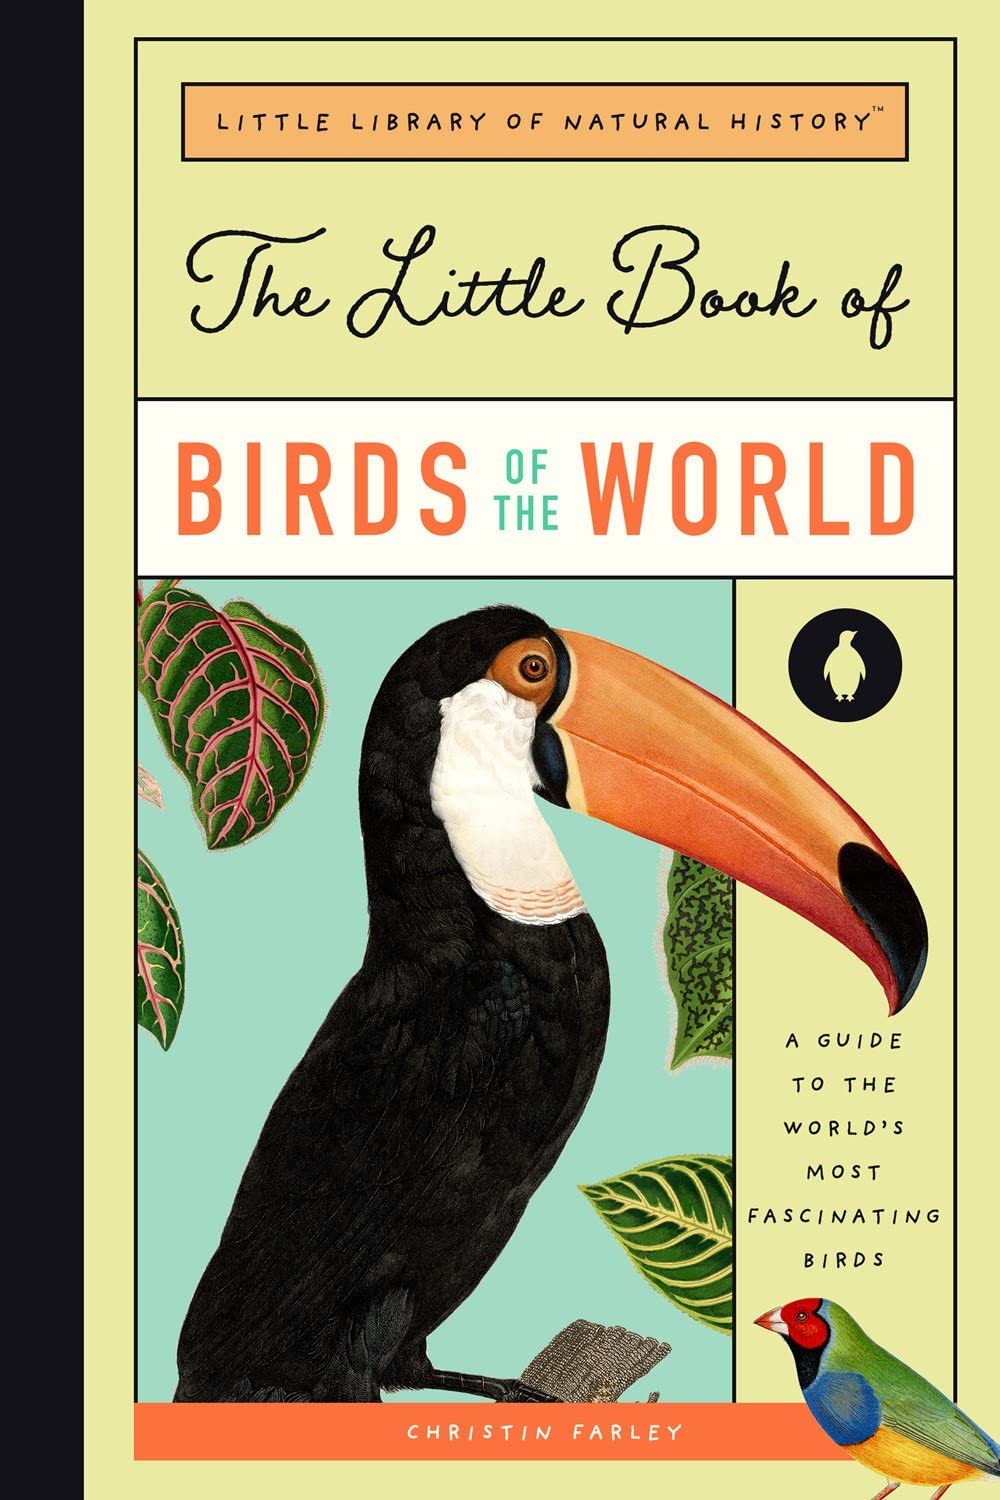 The　Birds　of　–　of　World:　Shop　Fascinating　Little　Most　the　to　World's　the　Guide　A　Map　Buy　Chart　Book　Birds